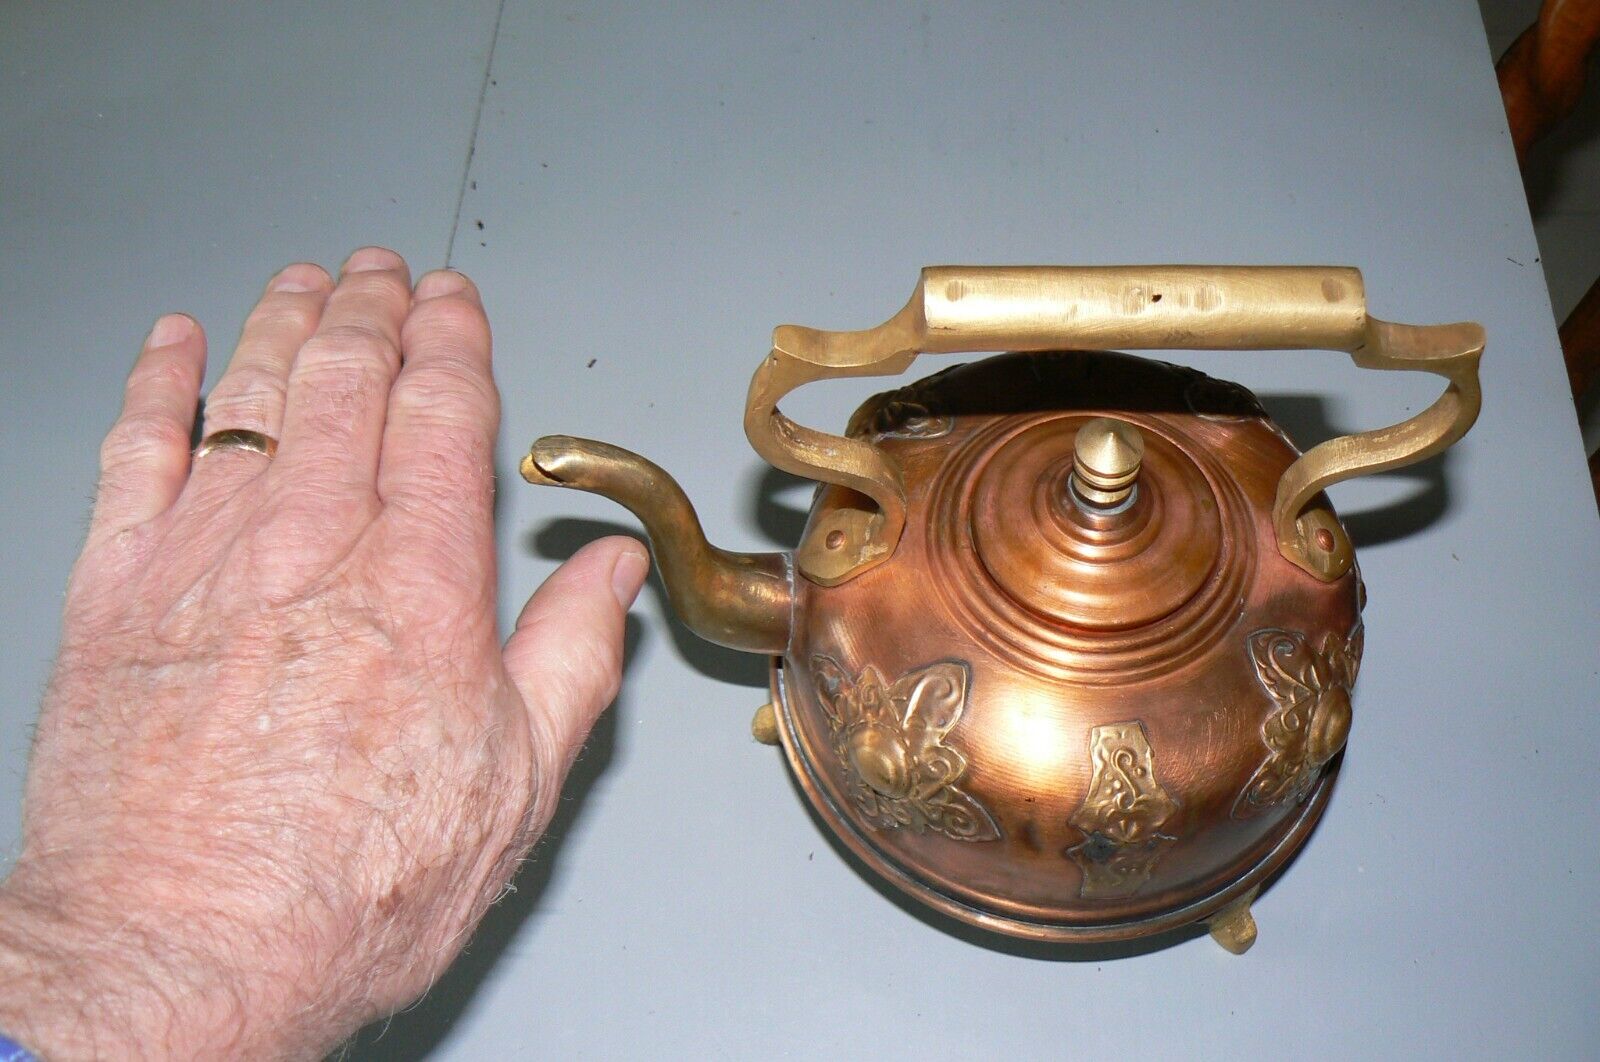 EXT RARE 1730s VERY SMALL TEA KETTLE OF COPPER - BRASS FLORAL DECORATION S MARK